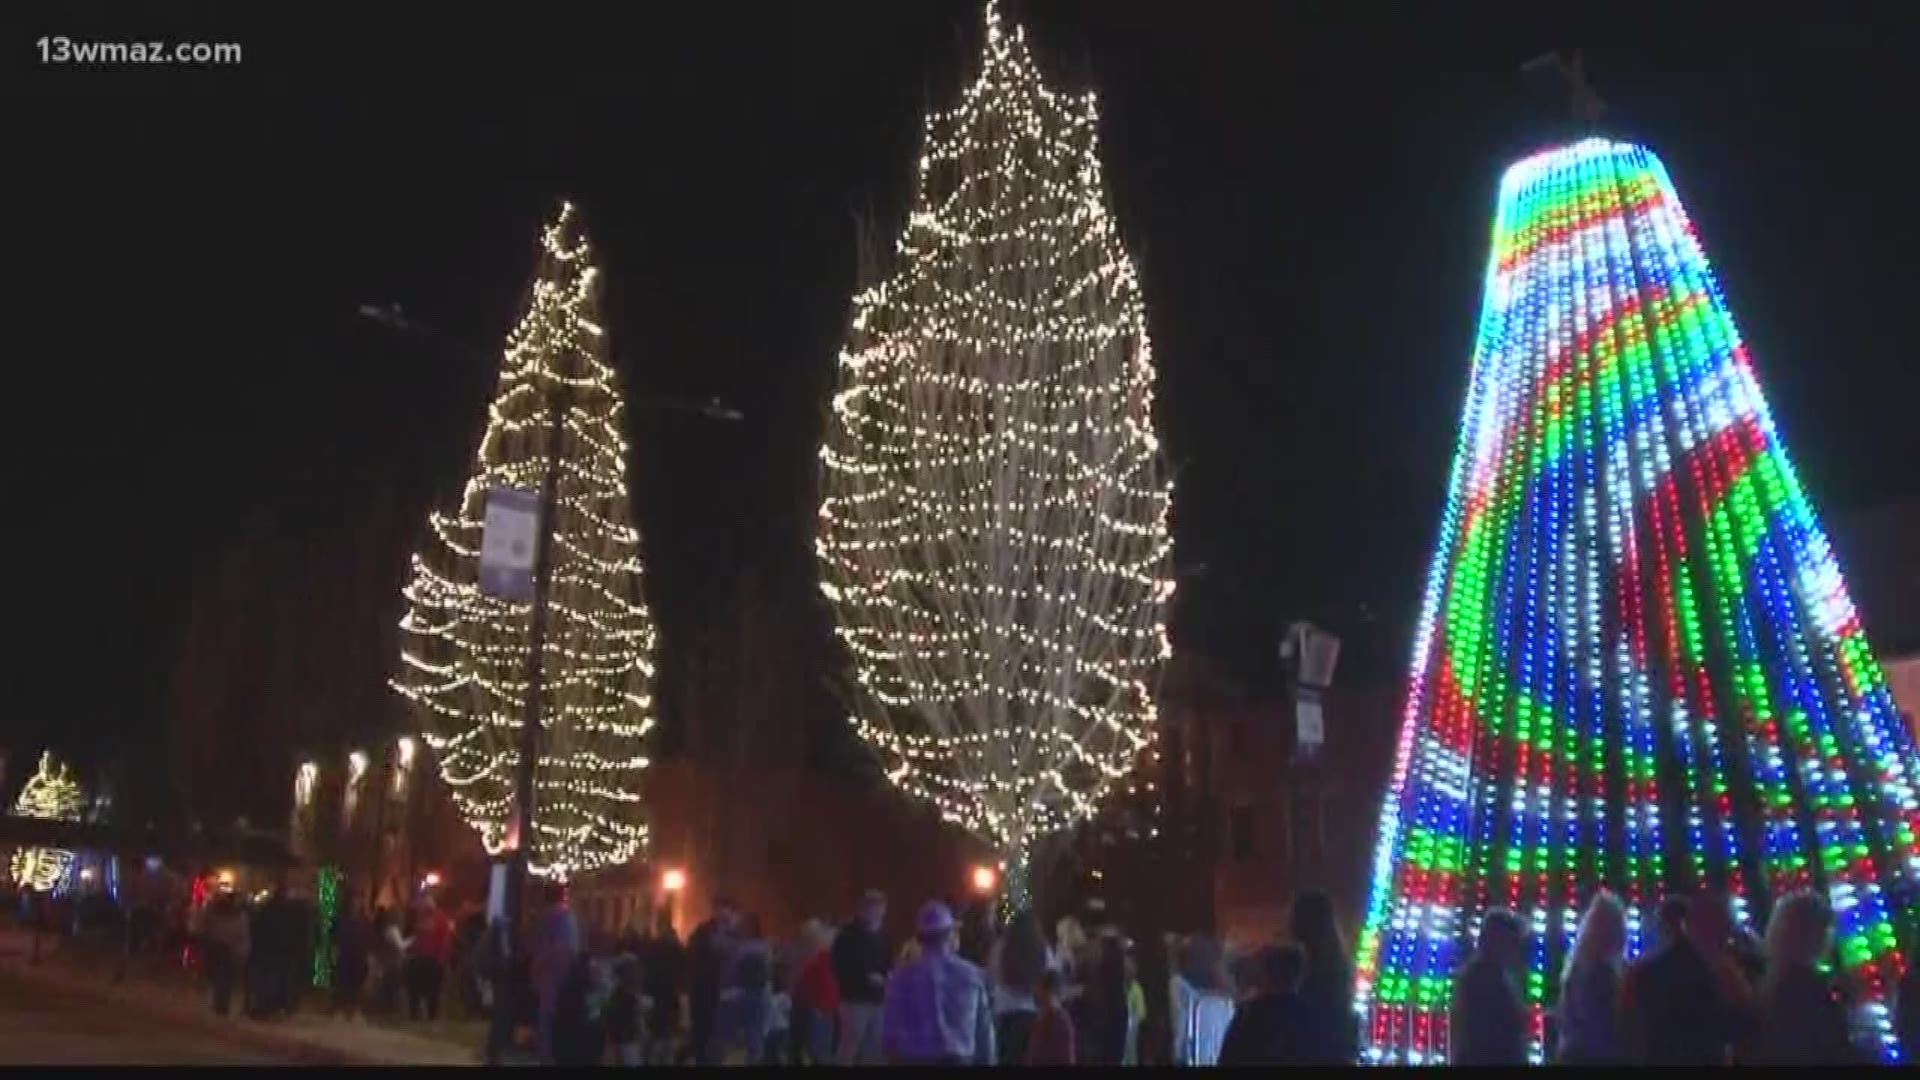 After over a month of holiday fun, downtown Macon will say goodbye to the Main Street Christmas Light Extravaganza.